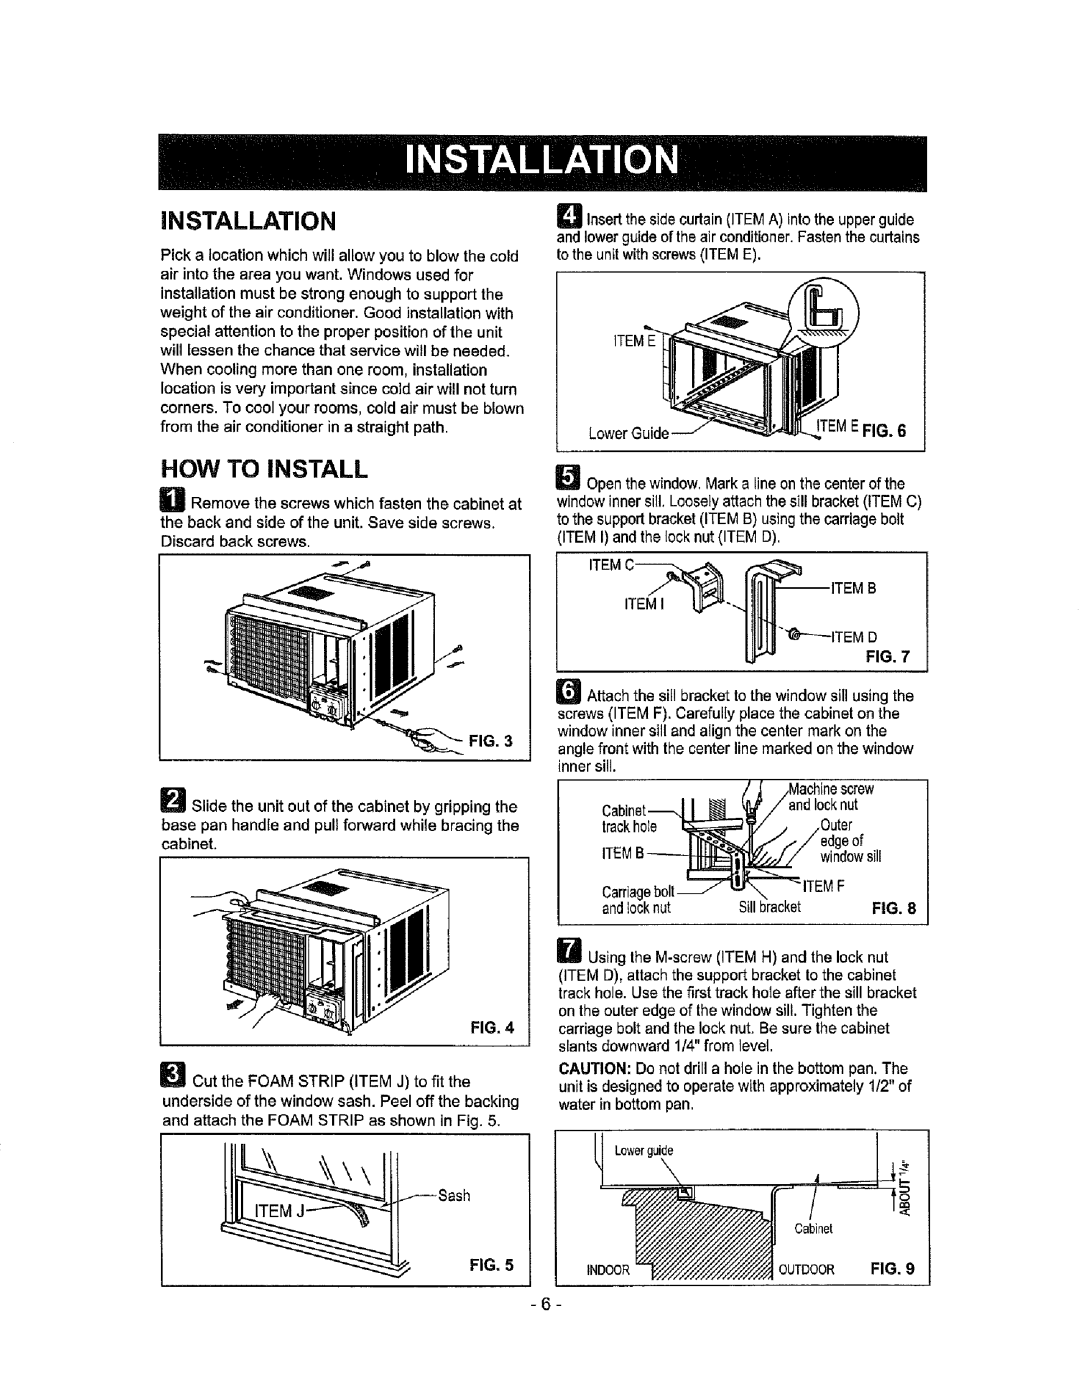 Kenmore 580.72184 owner manual Installation, How To Install, trackhole 